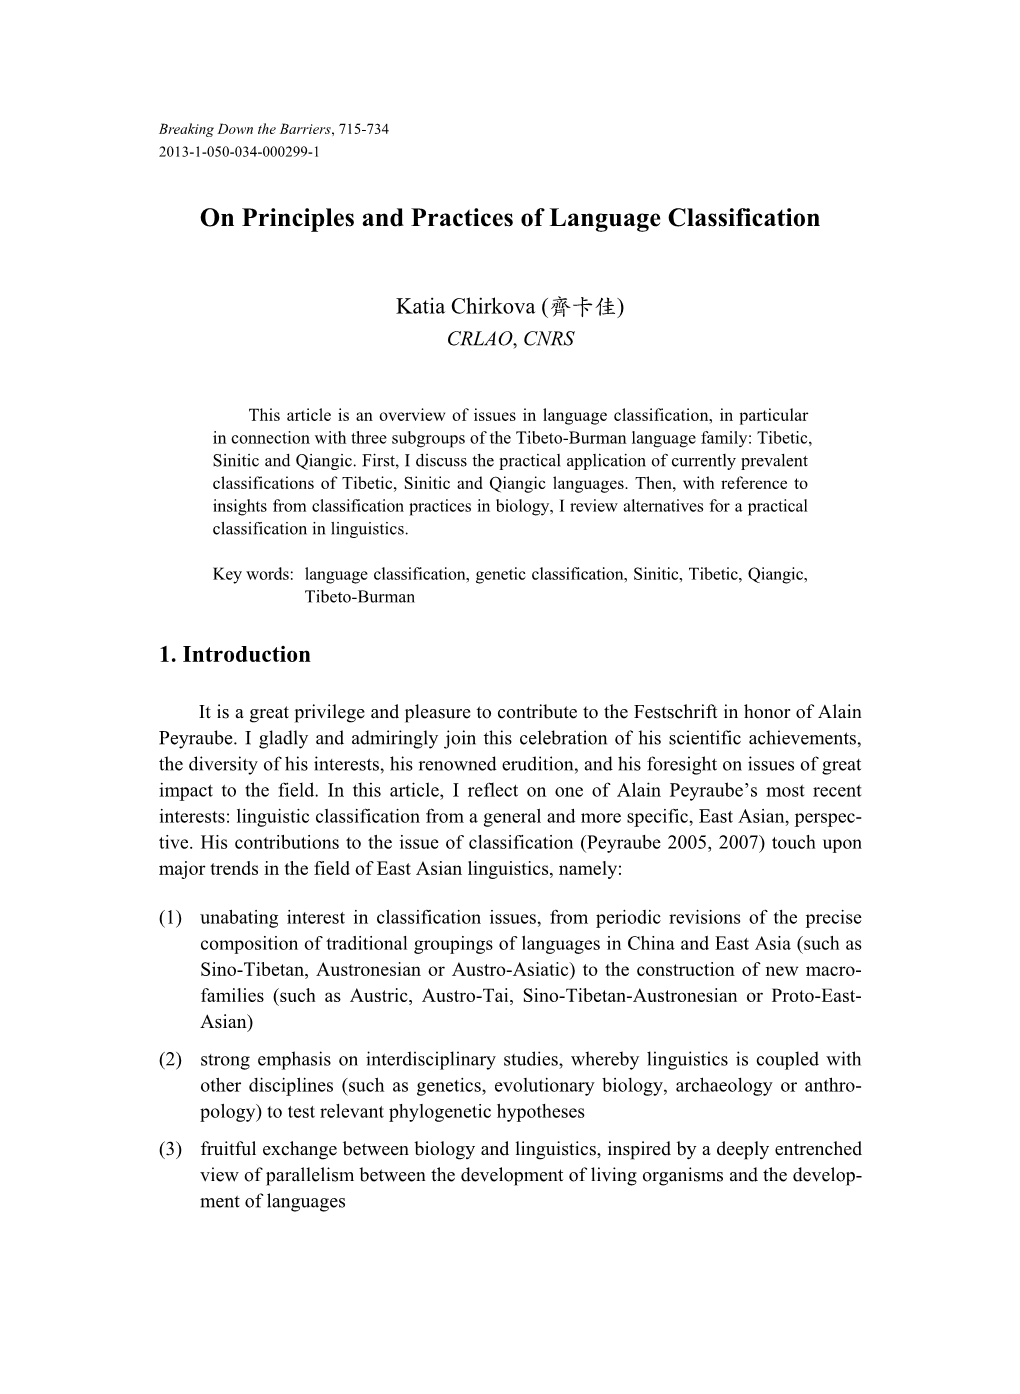 On Principles and Practices of Language Classification